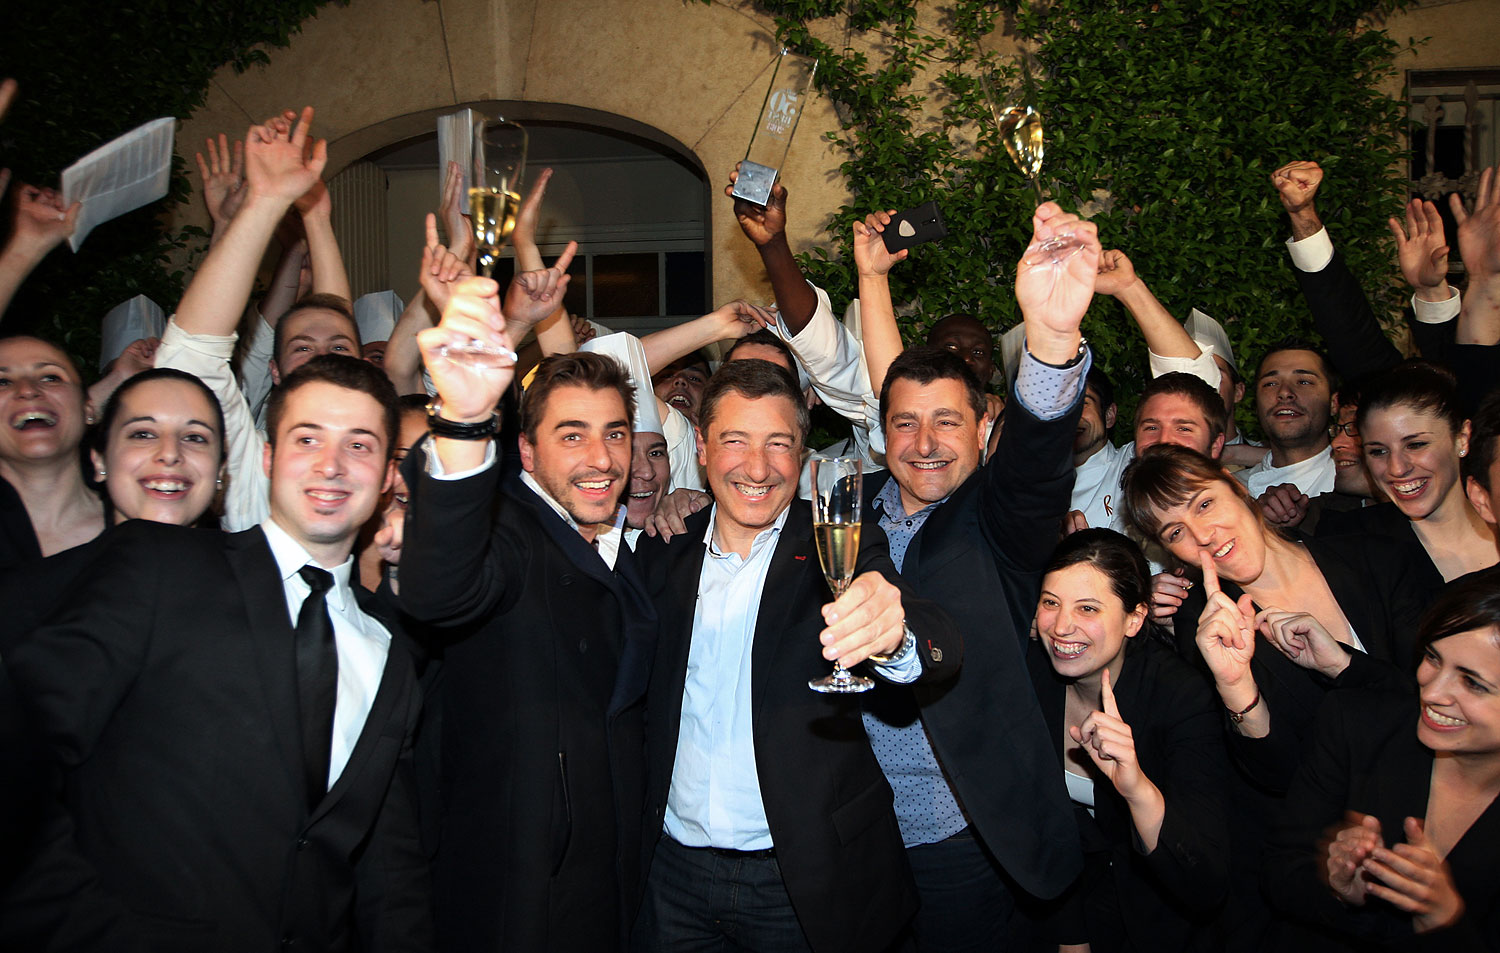 Spanish Chefs of "El Celler de Can Roca" Joan Roca, center, Jordi Roca, left, and Josep Roca, right, pose with their employees at the restaurant in Girona on April 30, 2013. (Quique Garcia—AFP/Getty Images)